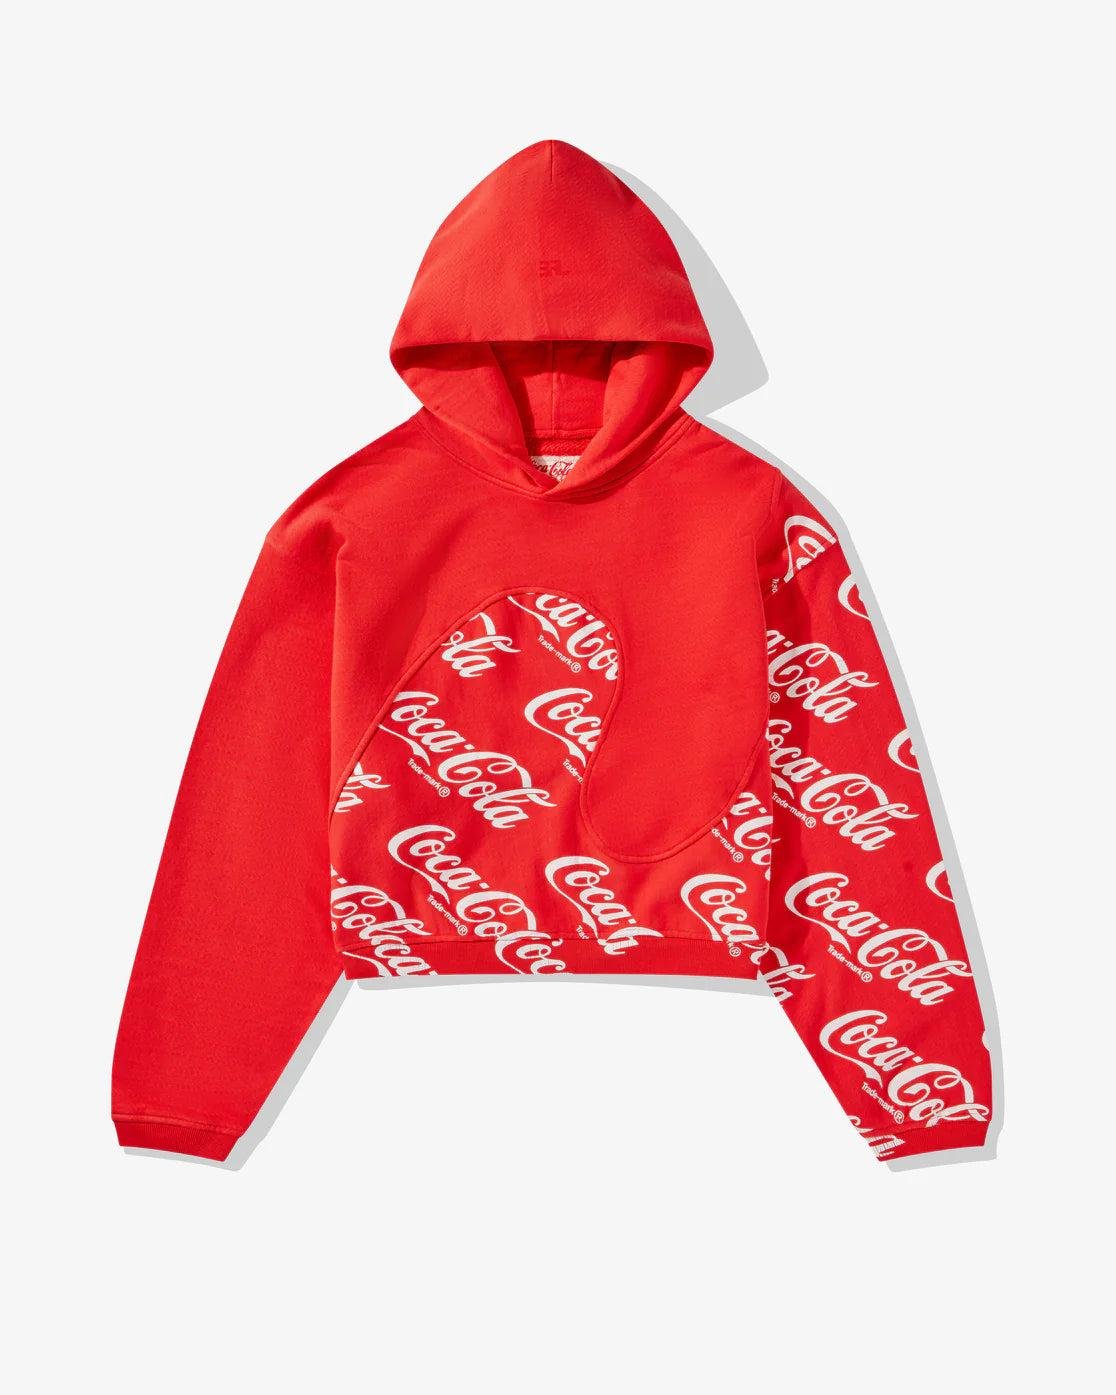 ERL - Men's Coca Cola Swirl Hoodie Knit - (Red) by ERL